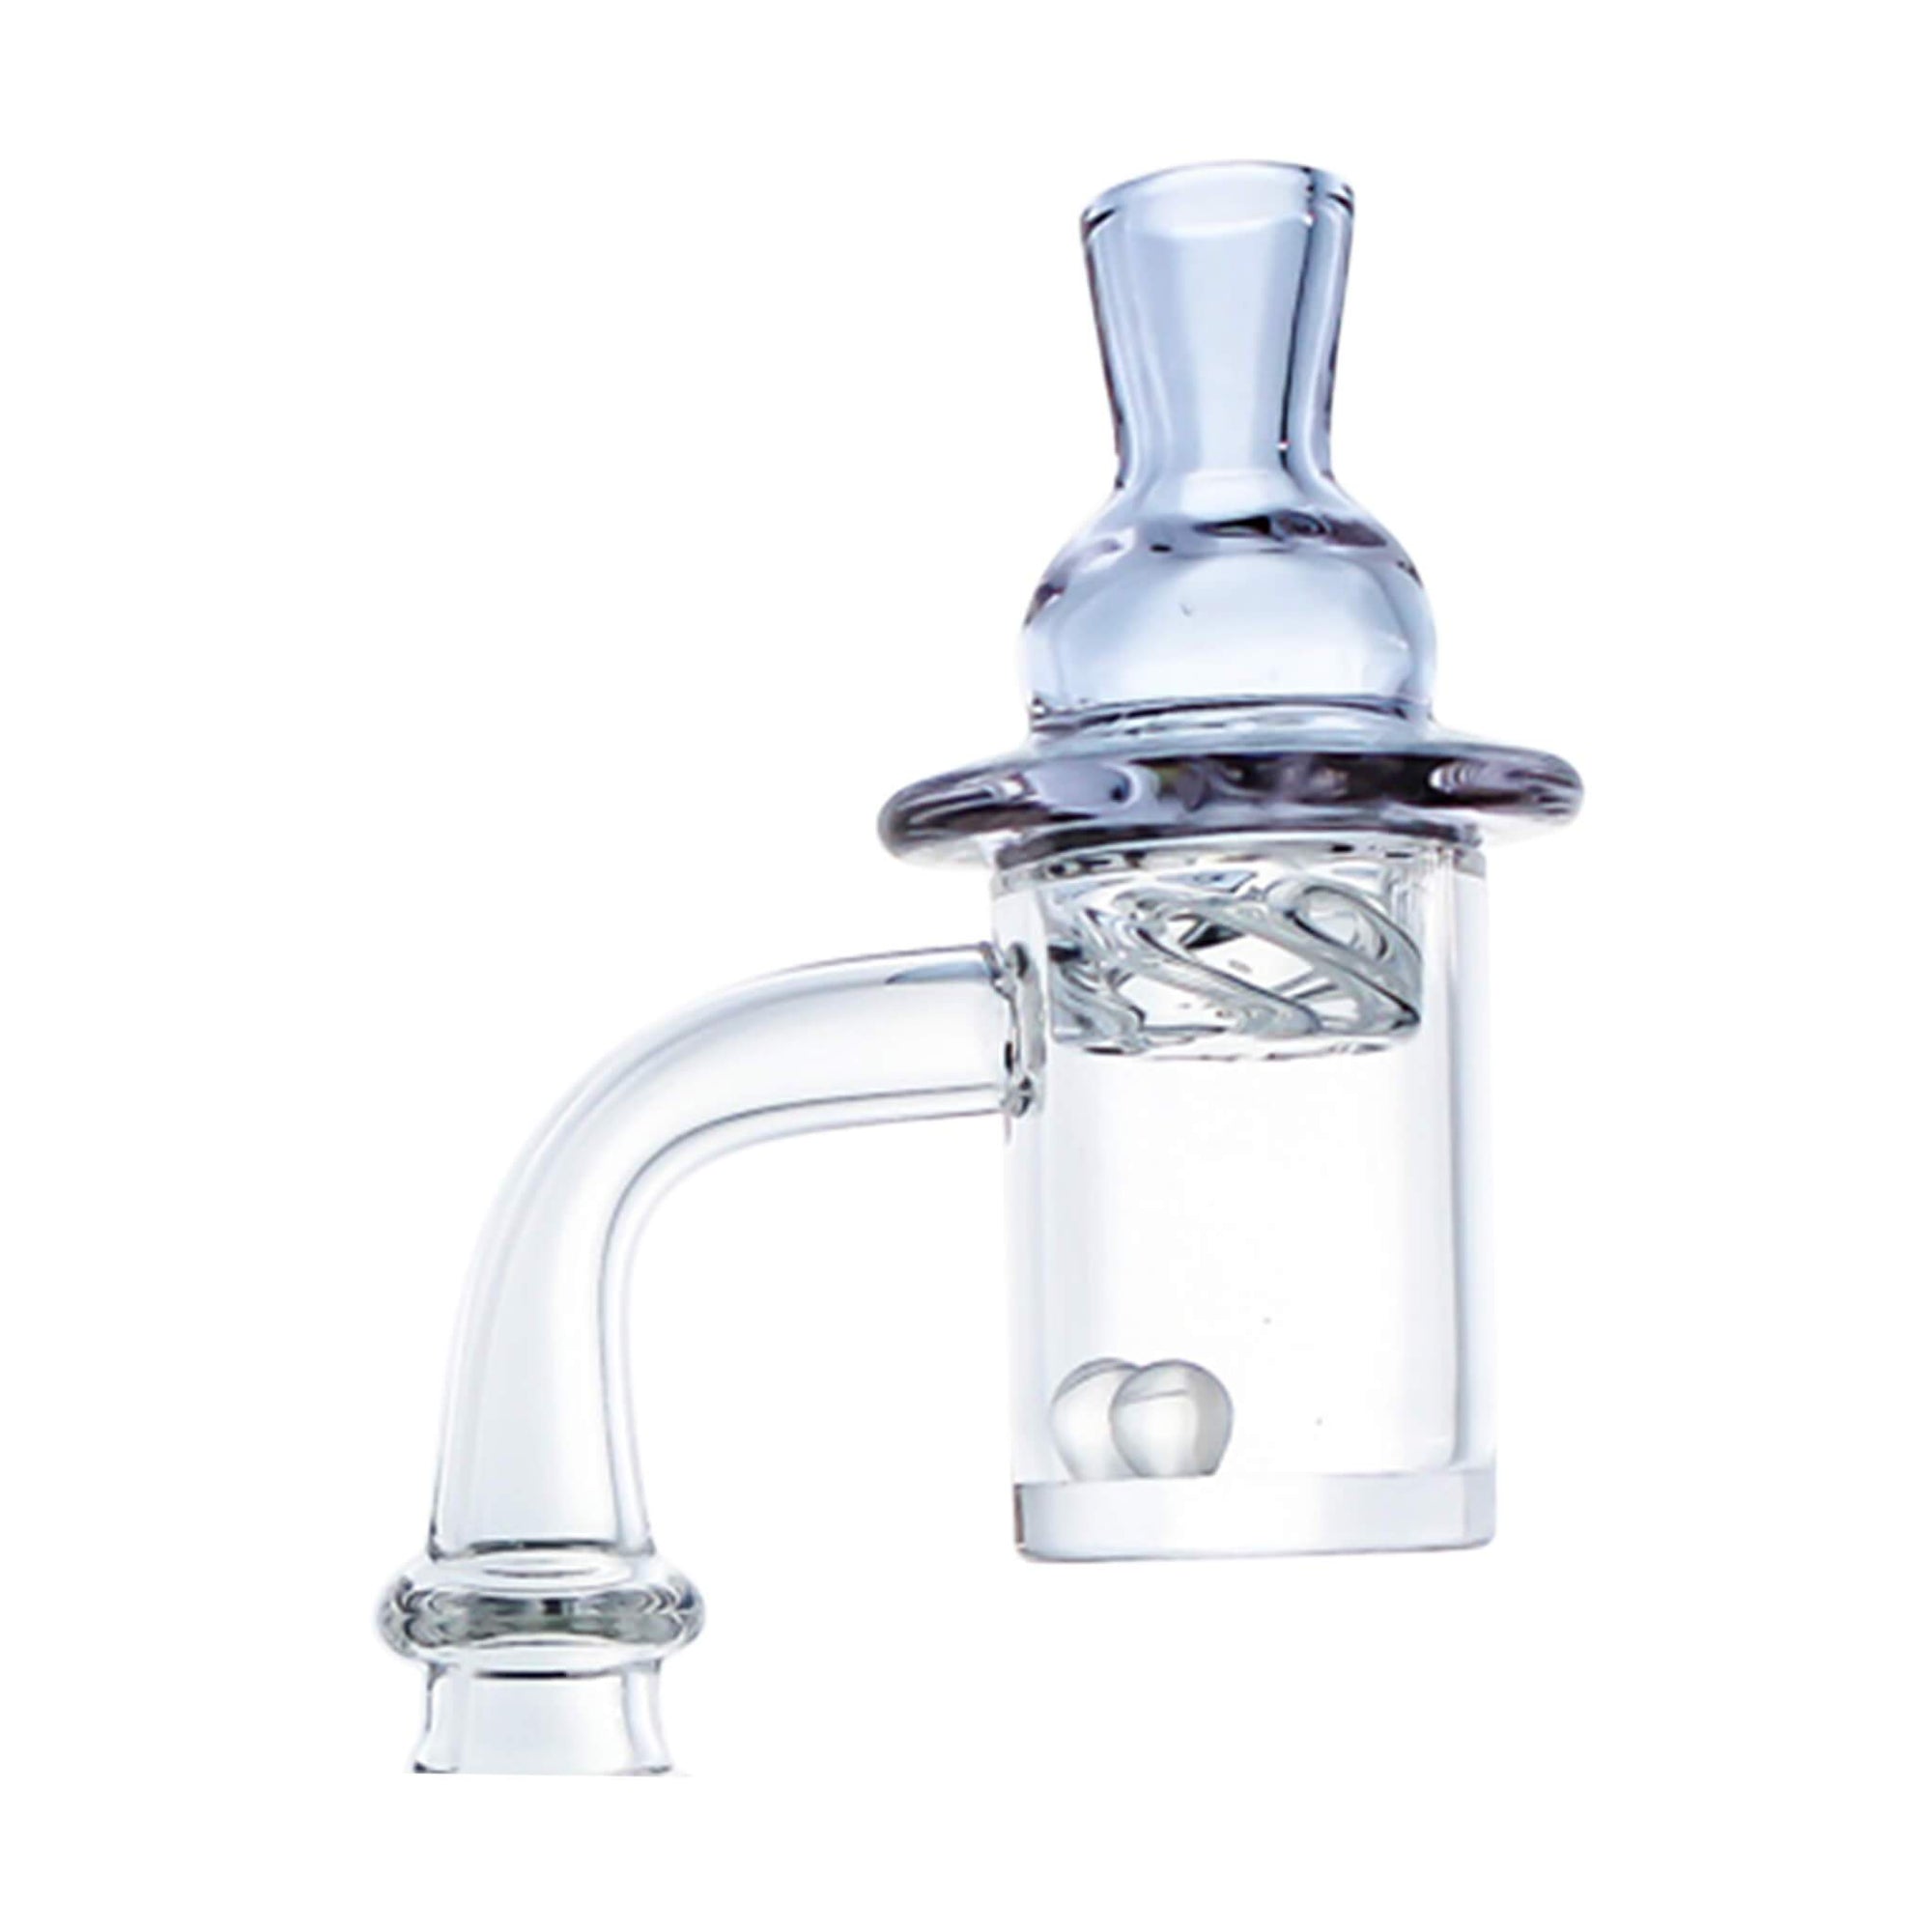 Terp Pearls, Mega Cyclone Spinner Carb Cap, and 25mm Banger Combo Pack | Blue Cap Kit View | TDS